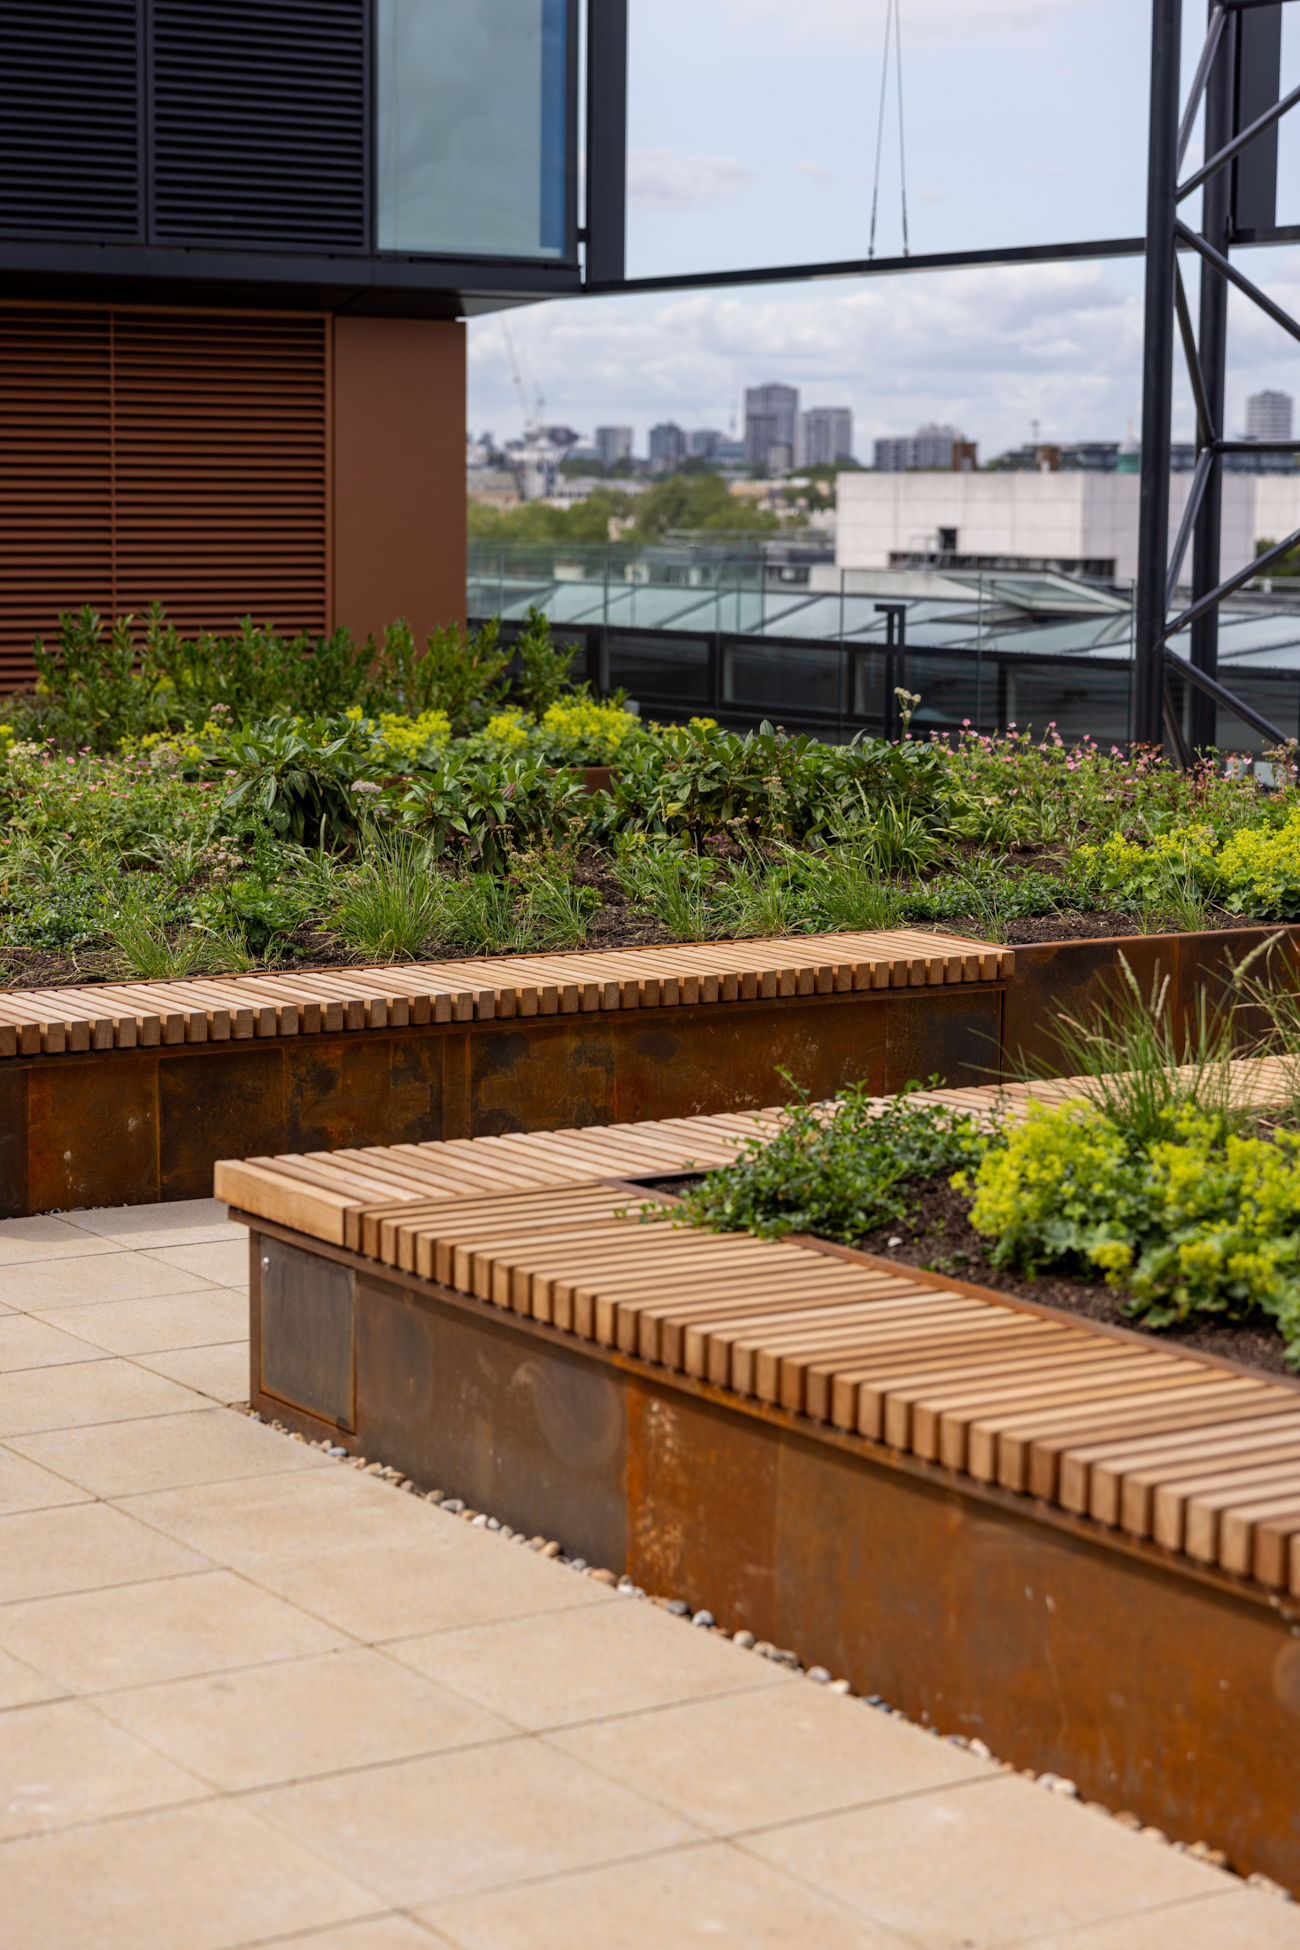 The Hub benches and planters